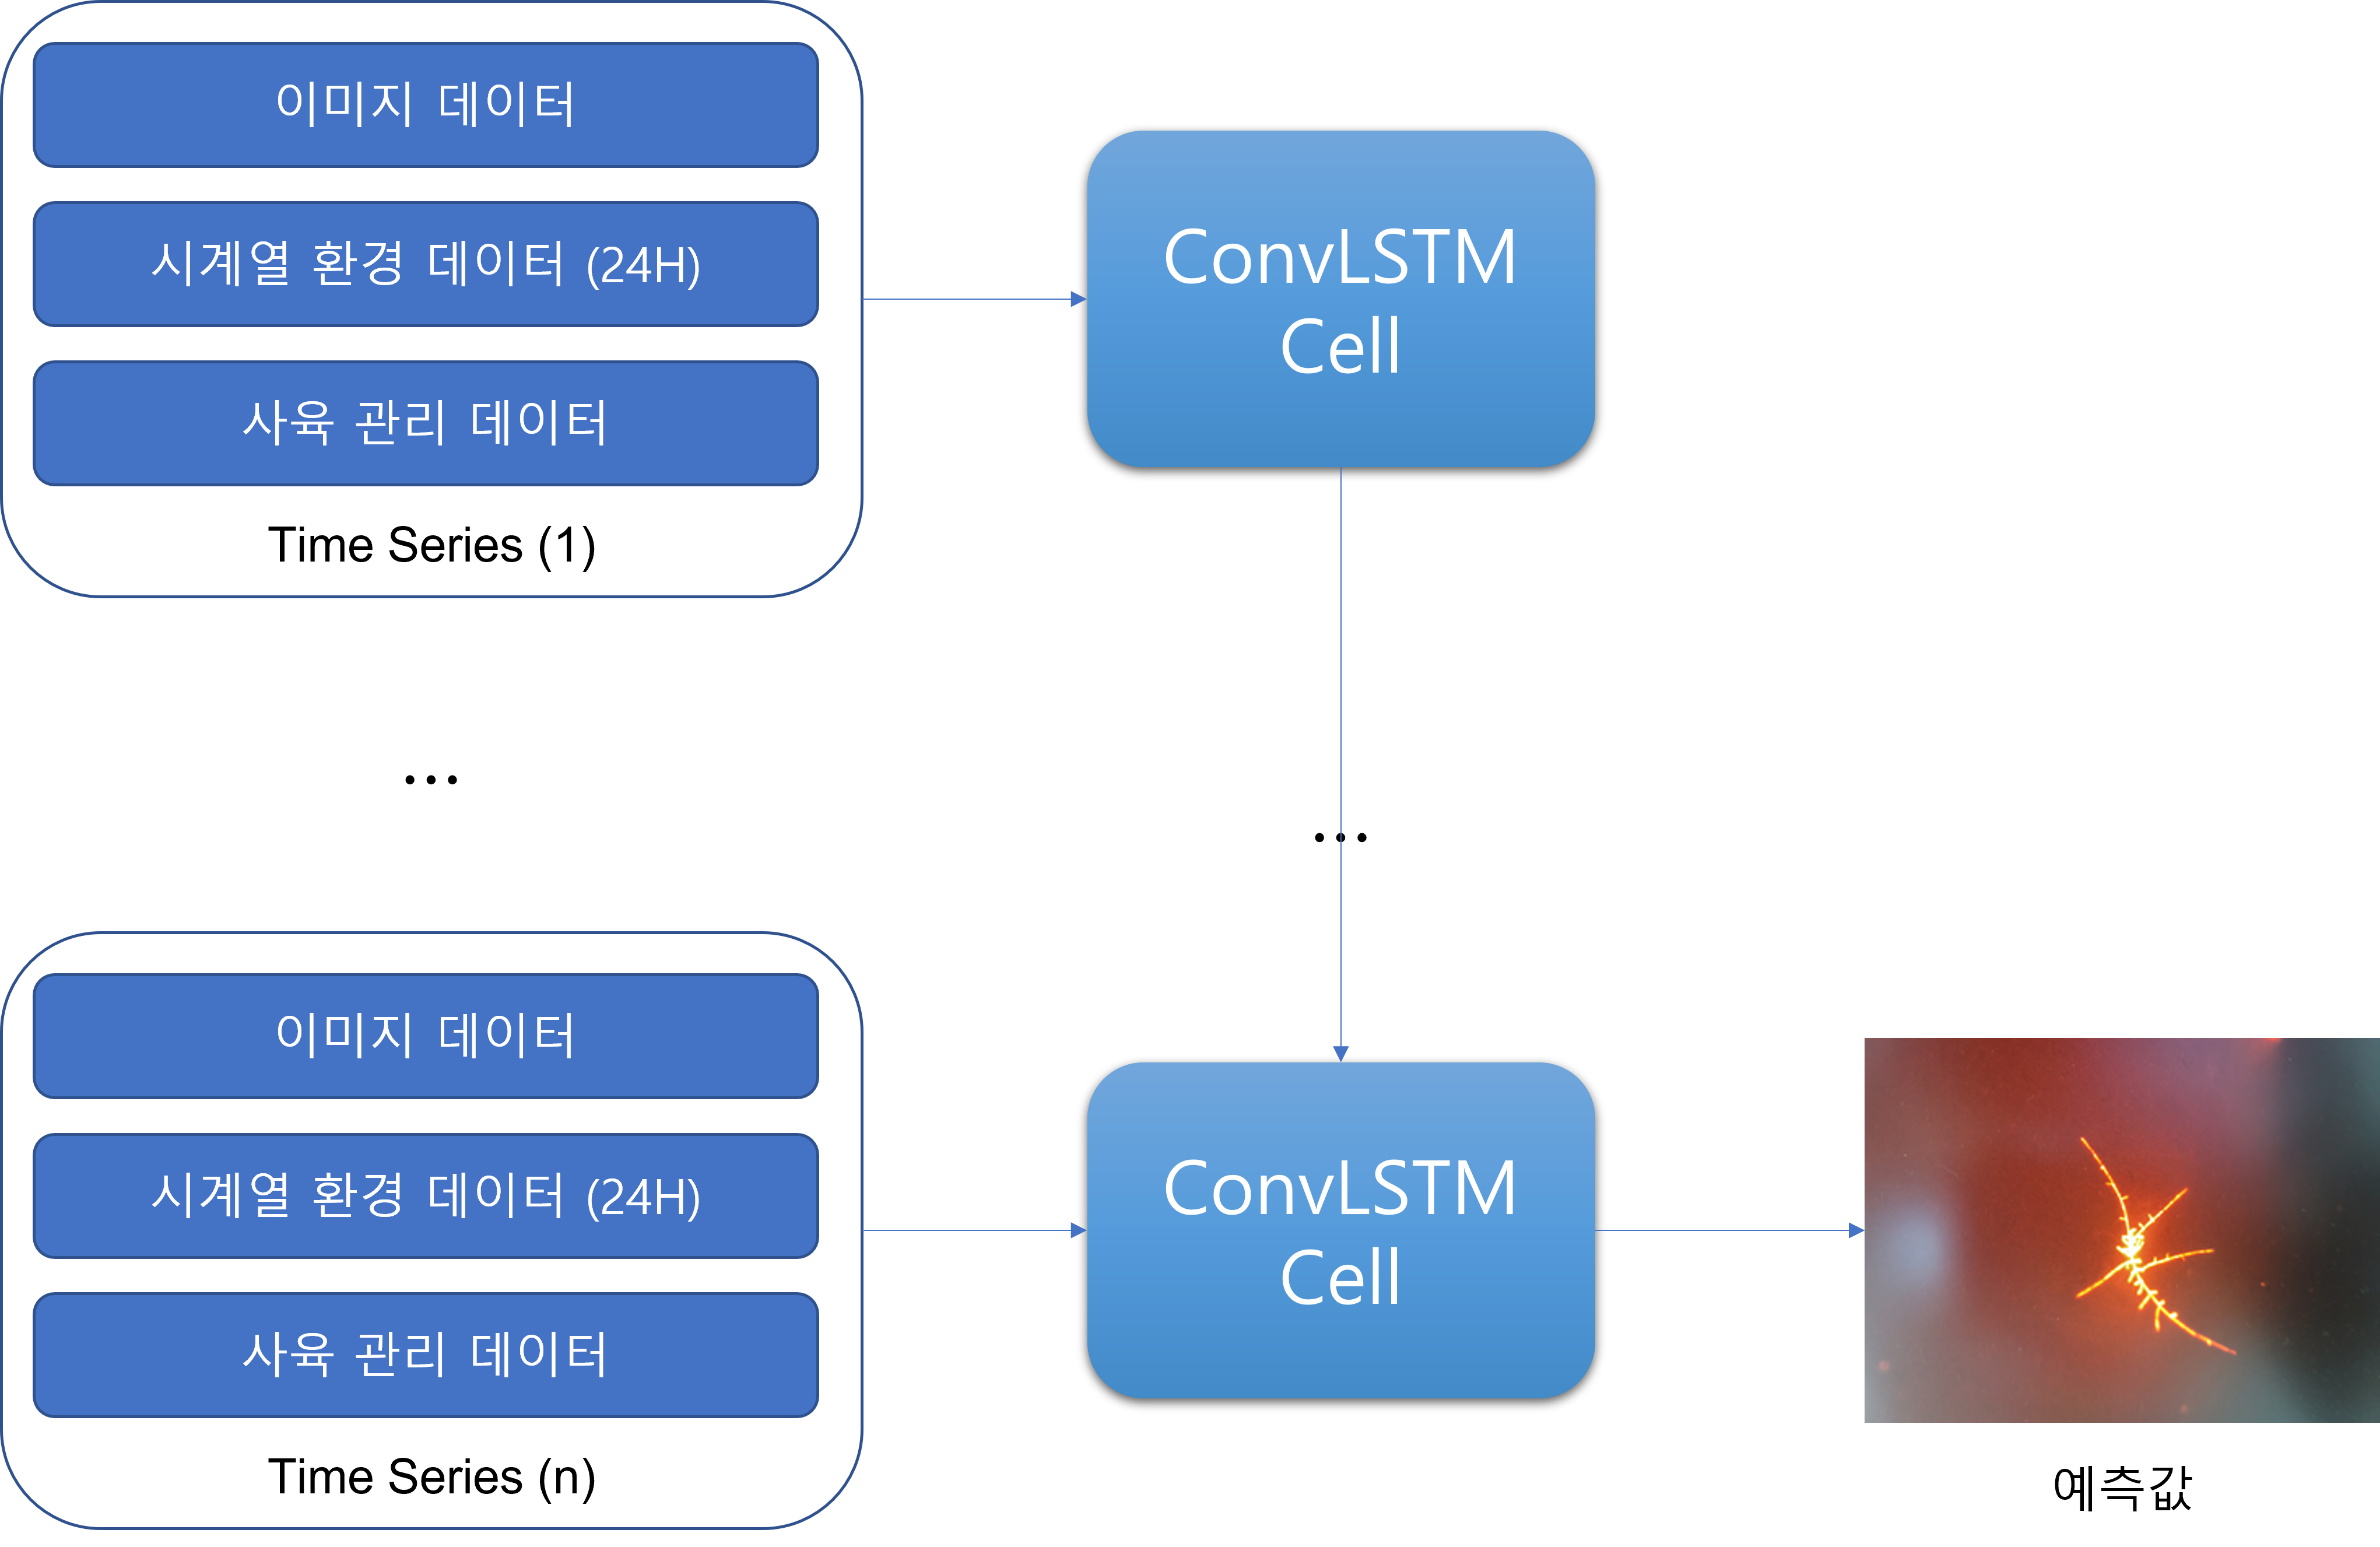 ConvLSTM Cell 구조 1